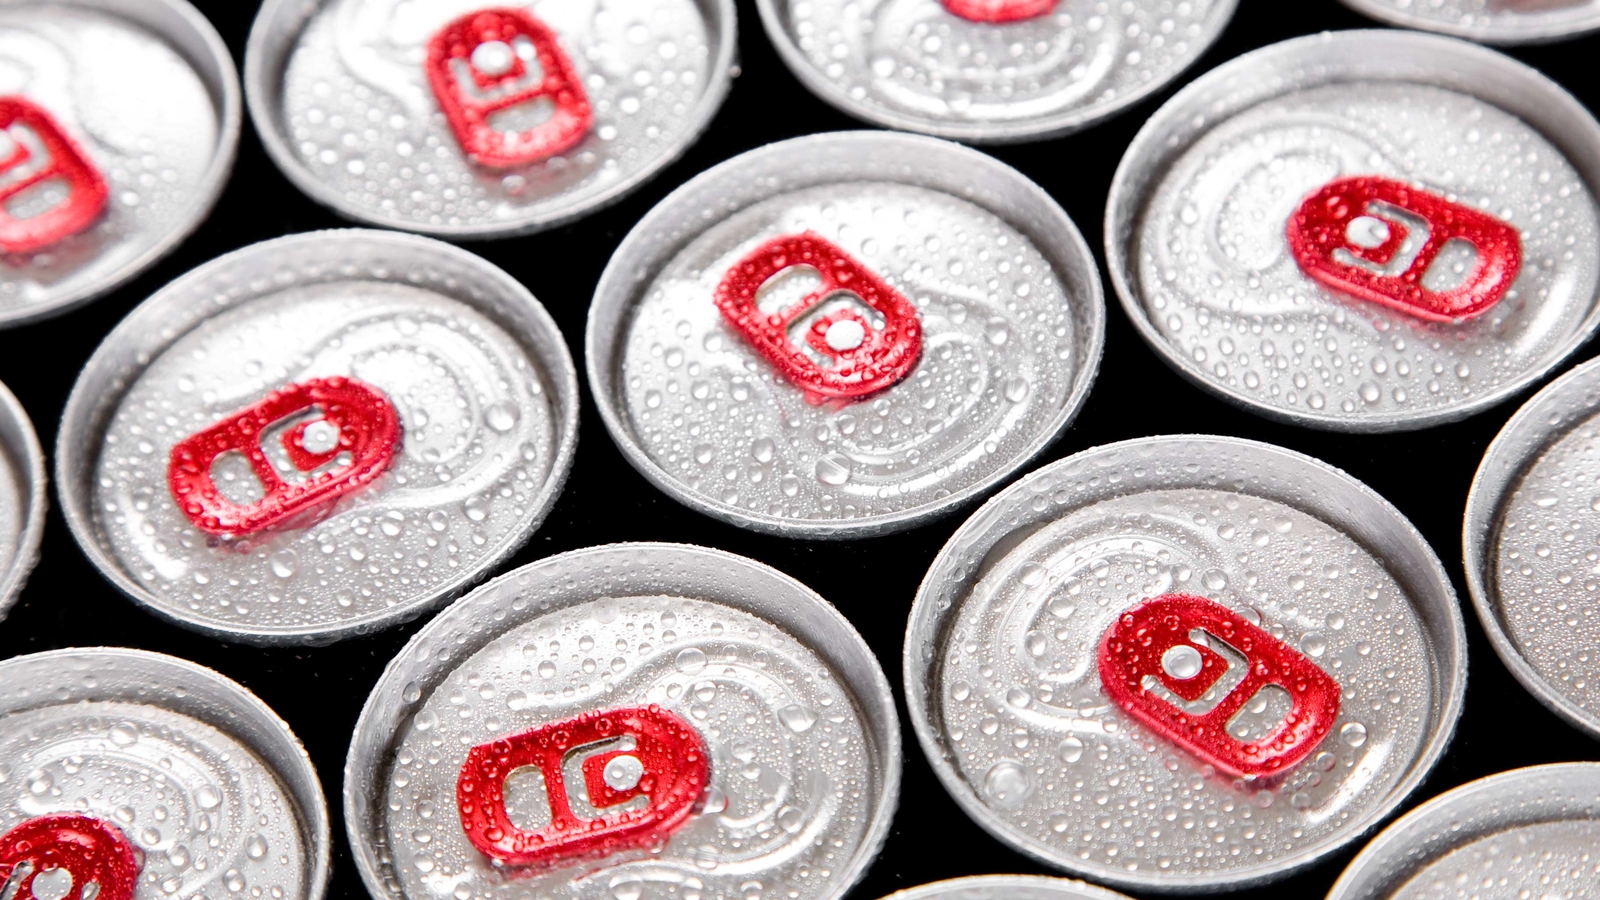 An 8-year-old boy with heart problems from energy drinks – emergency physician